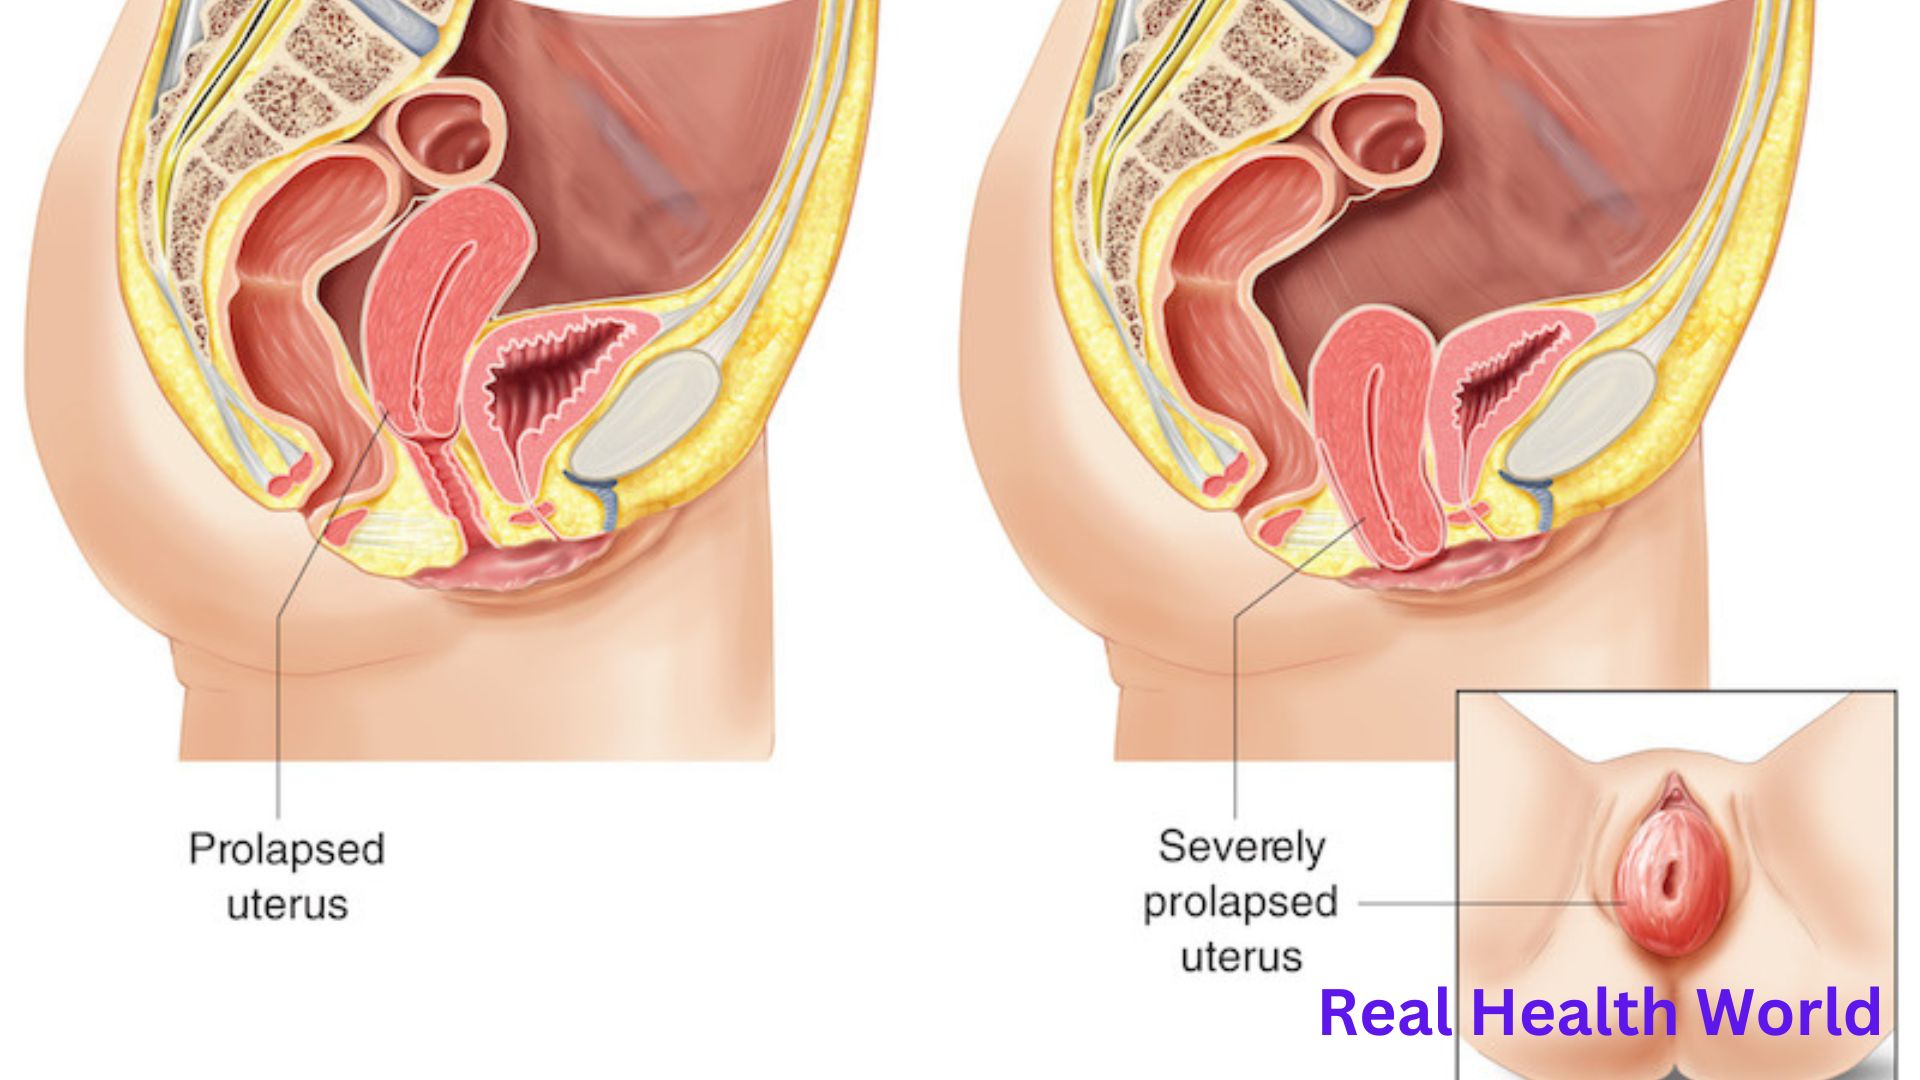 What to do if the uterus descends